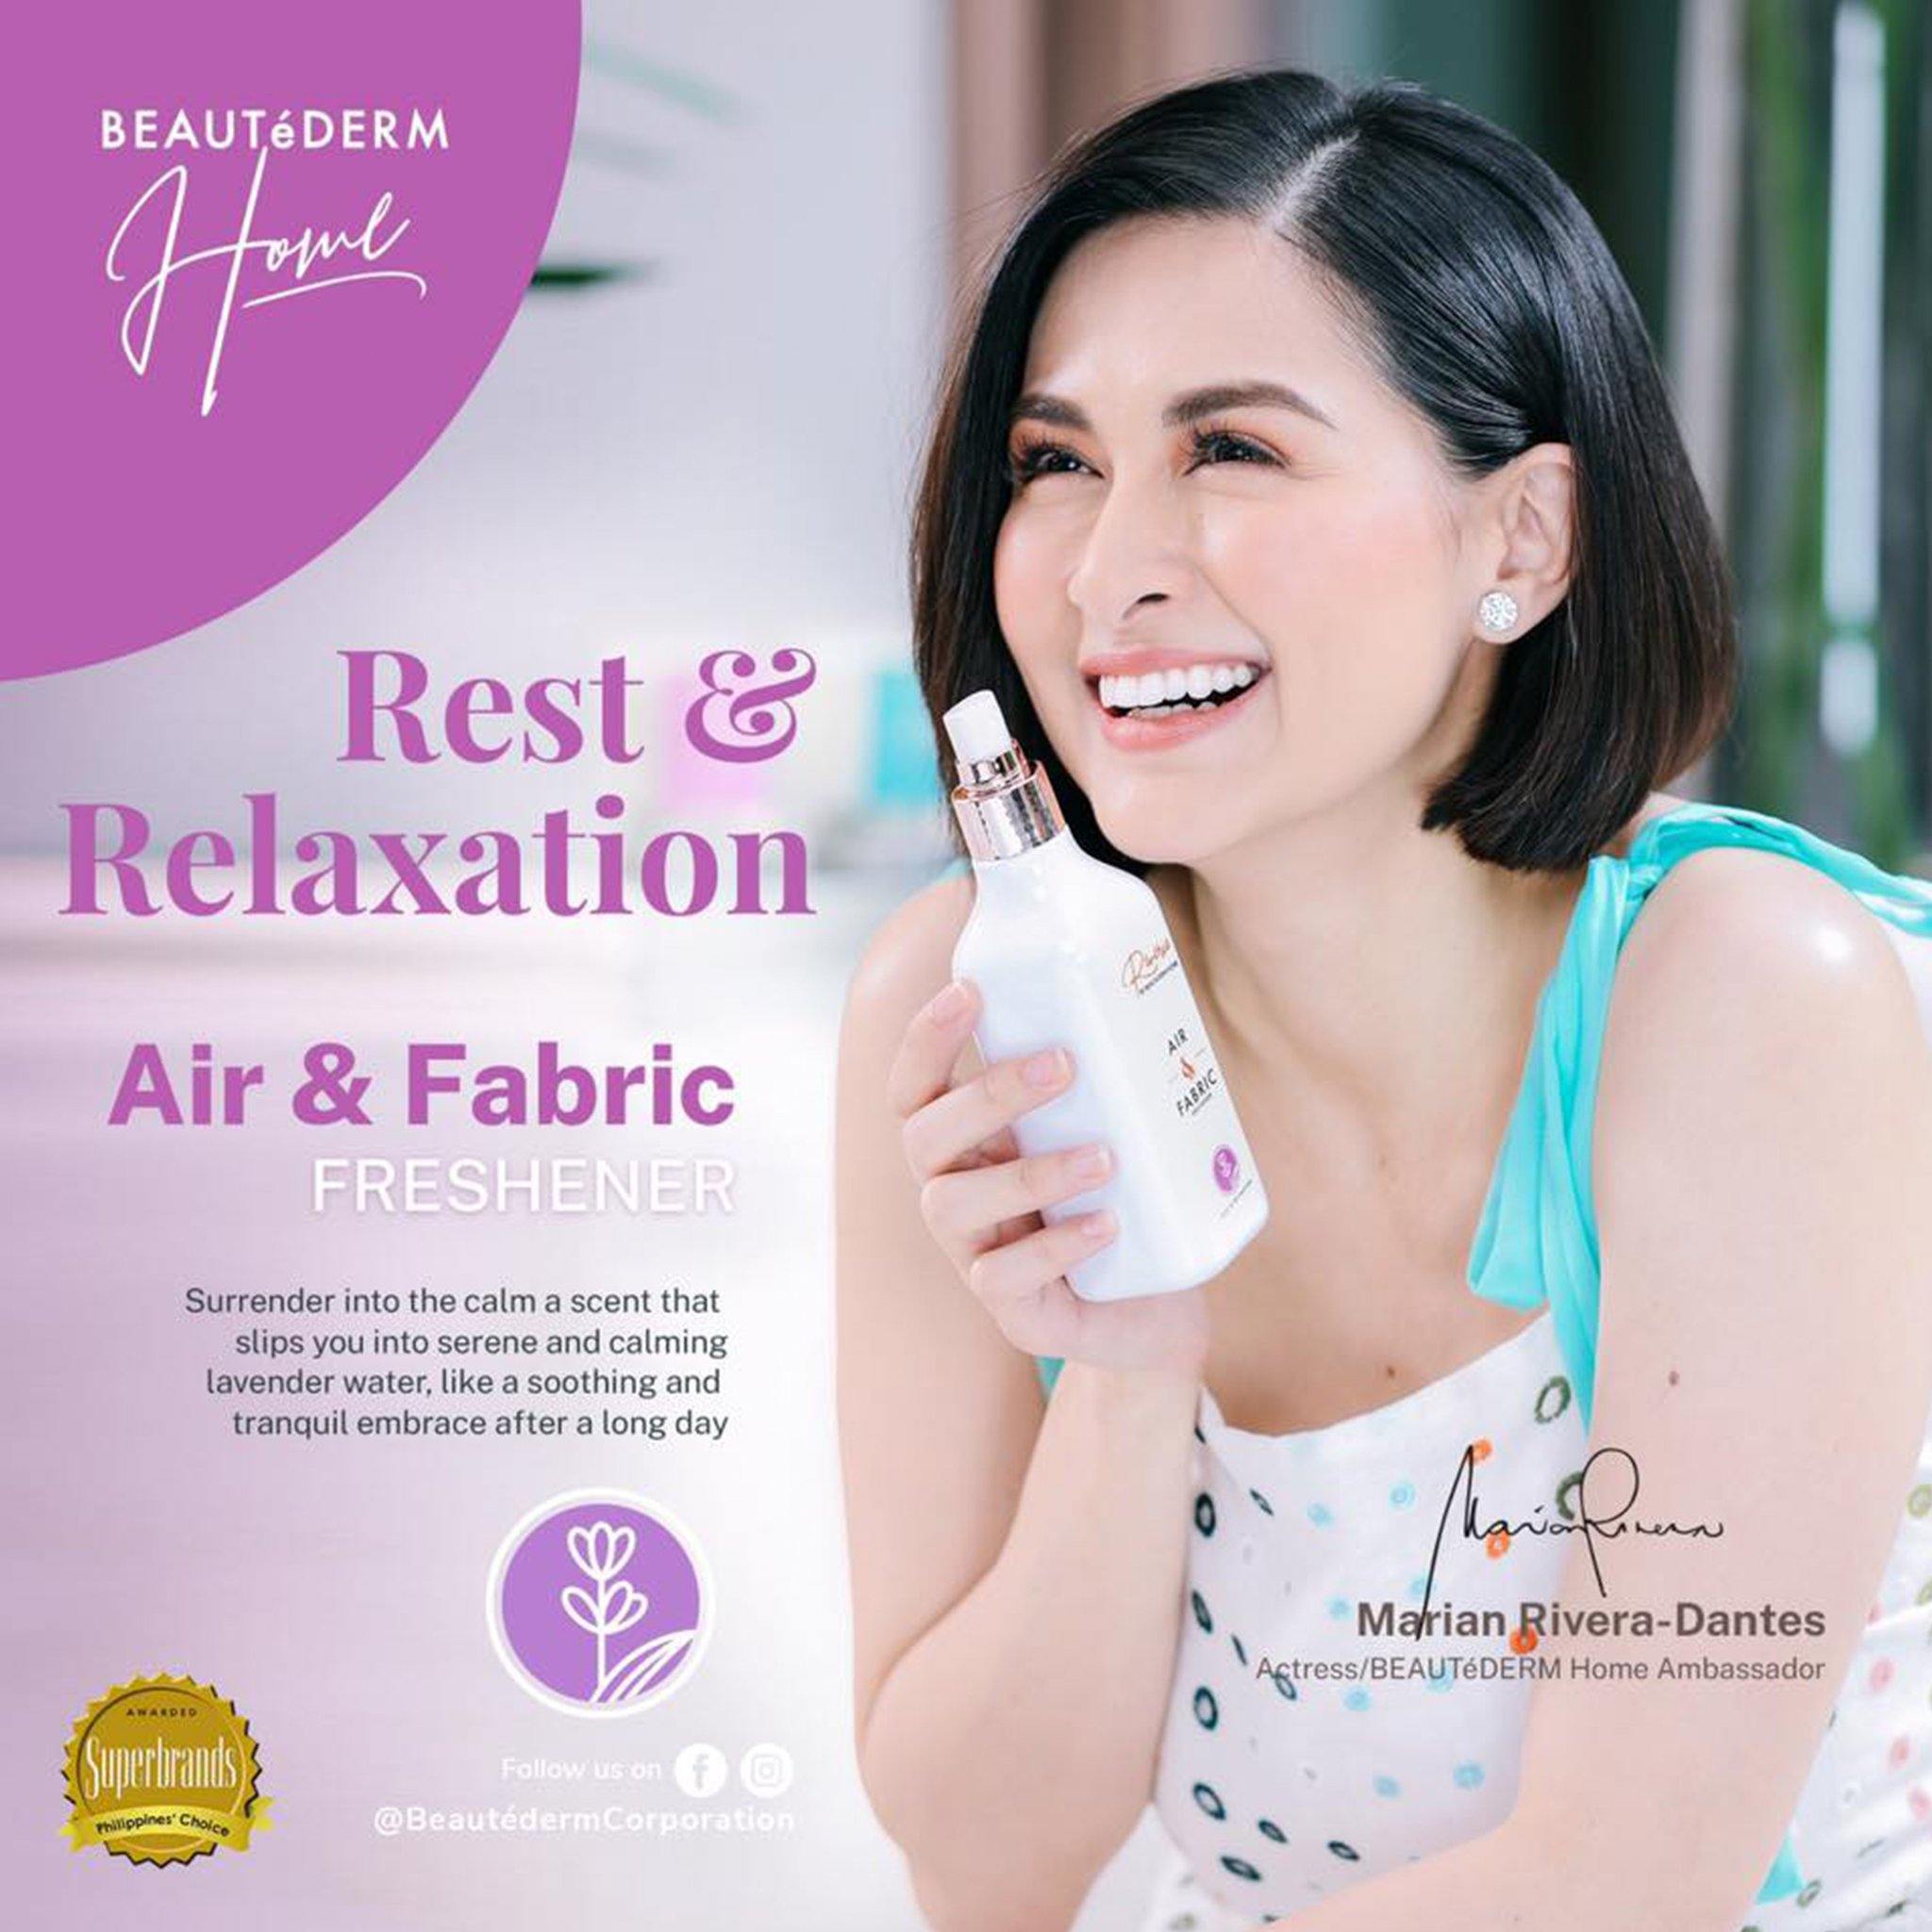 Air & Fabric Freshener, Rest & Relaxation (Lavender Scent), 250ml, Reverie by Beautederm Home, with Marian Rivera-Dantes (Beautederm Home Ambassador)